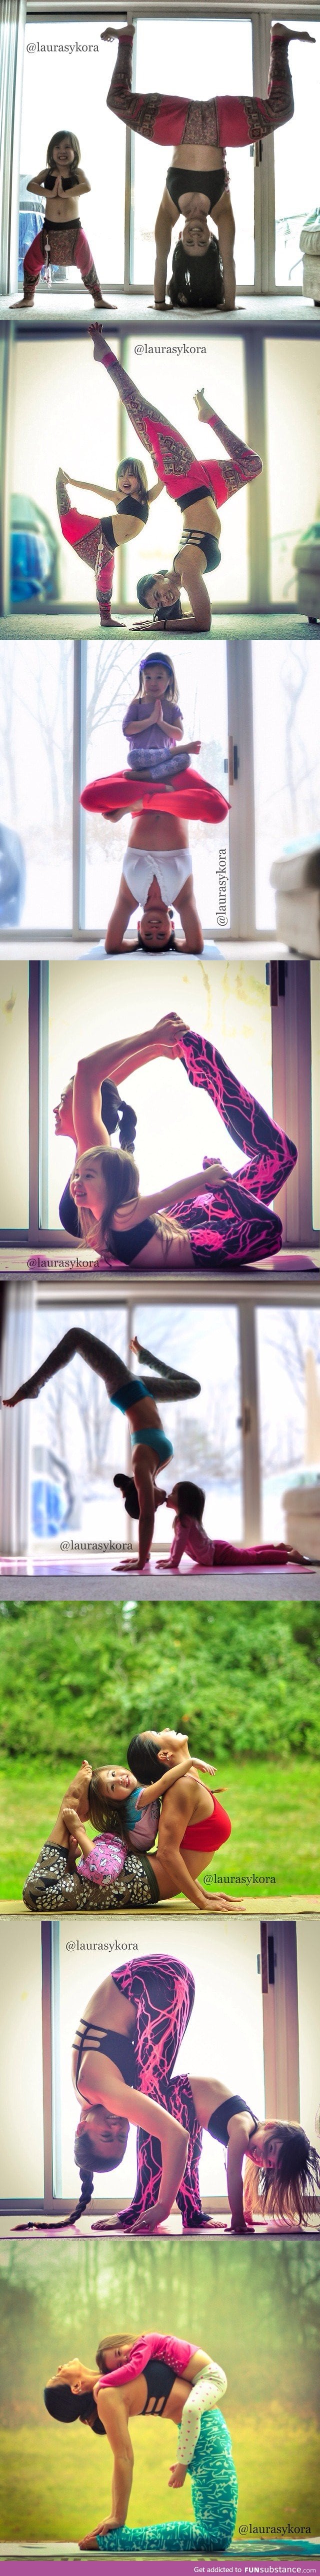 Little girl does yoga poses with her mom.